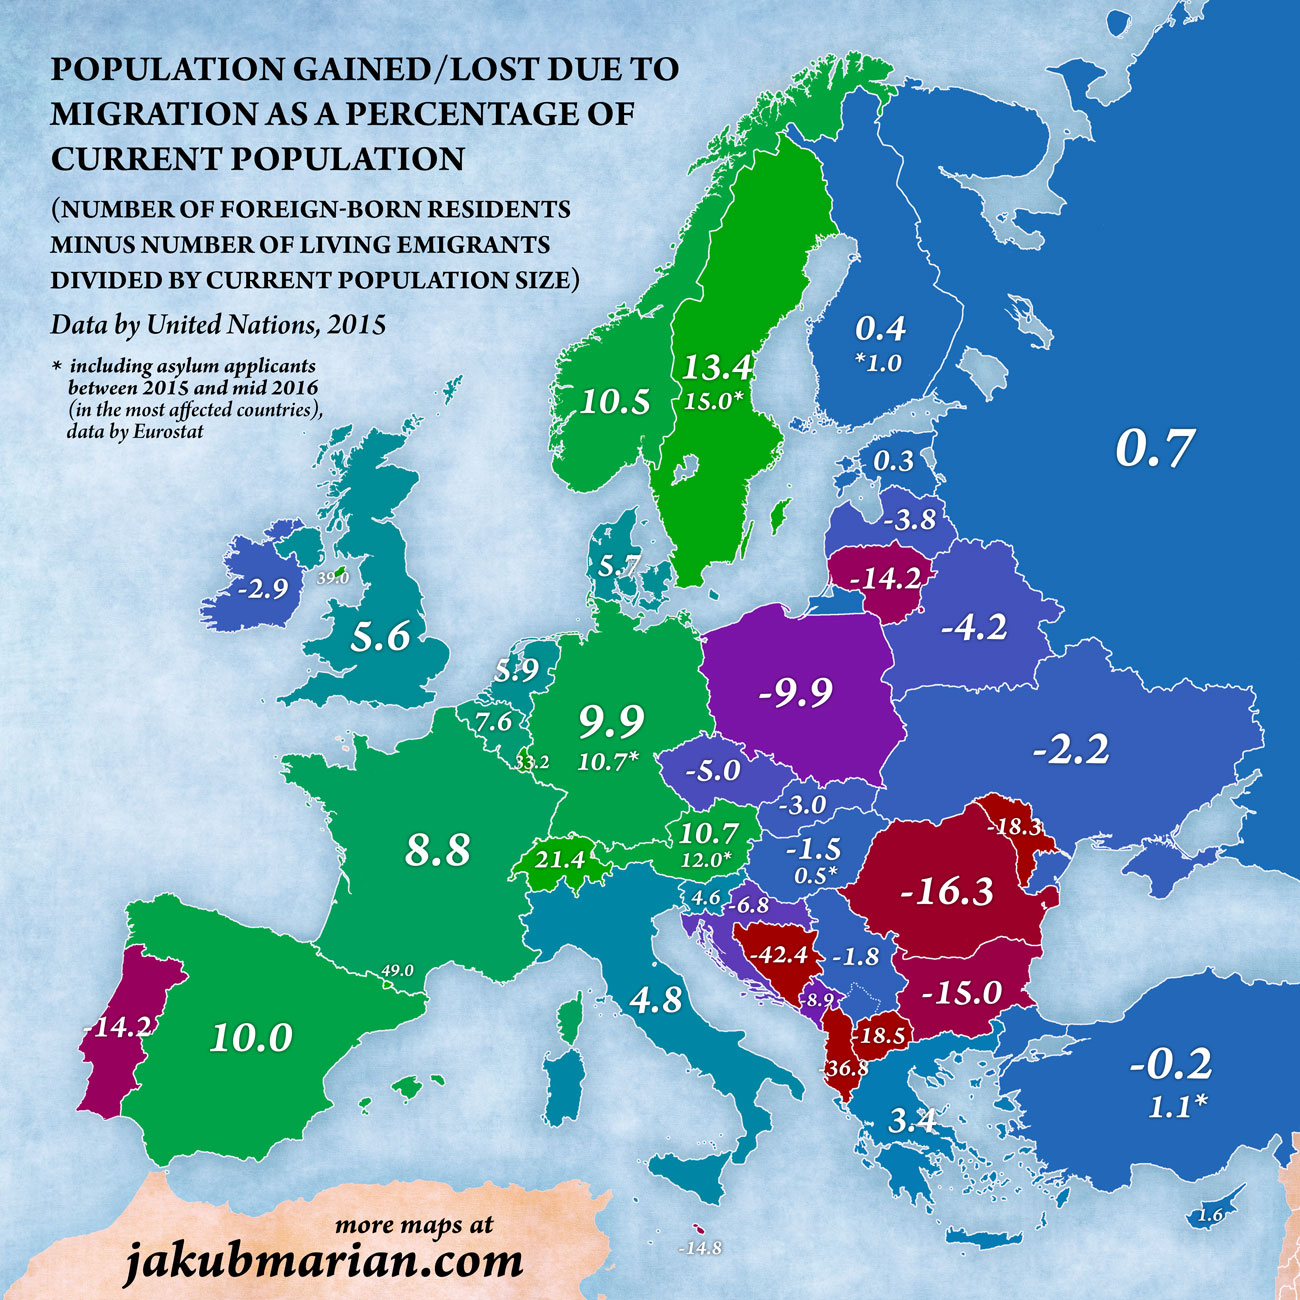 Migration Patterns And Population Gains And Losses In Europe